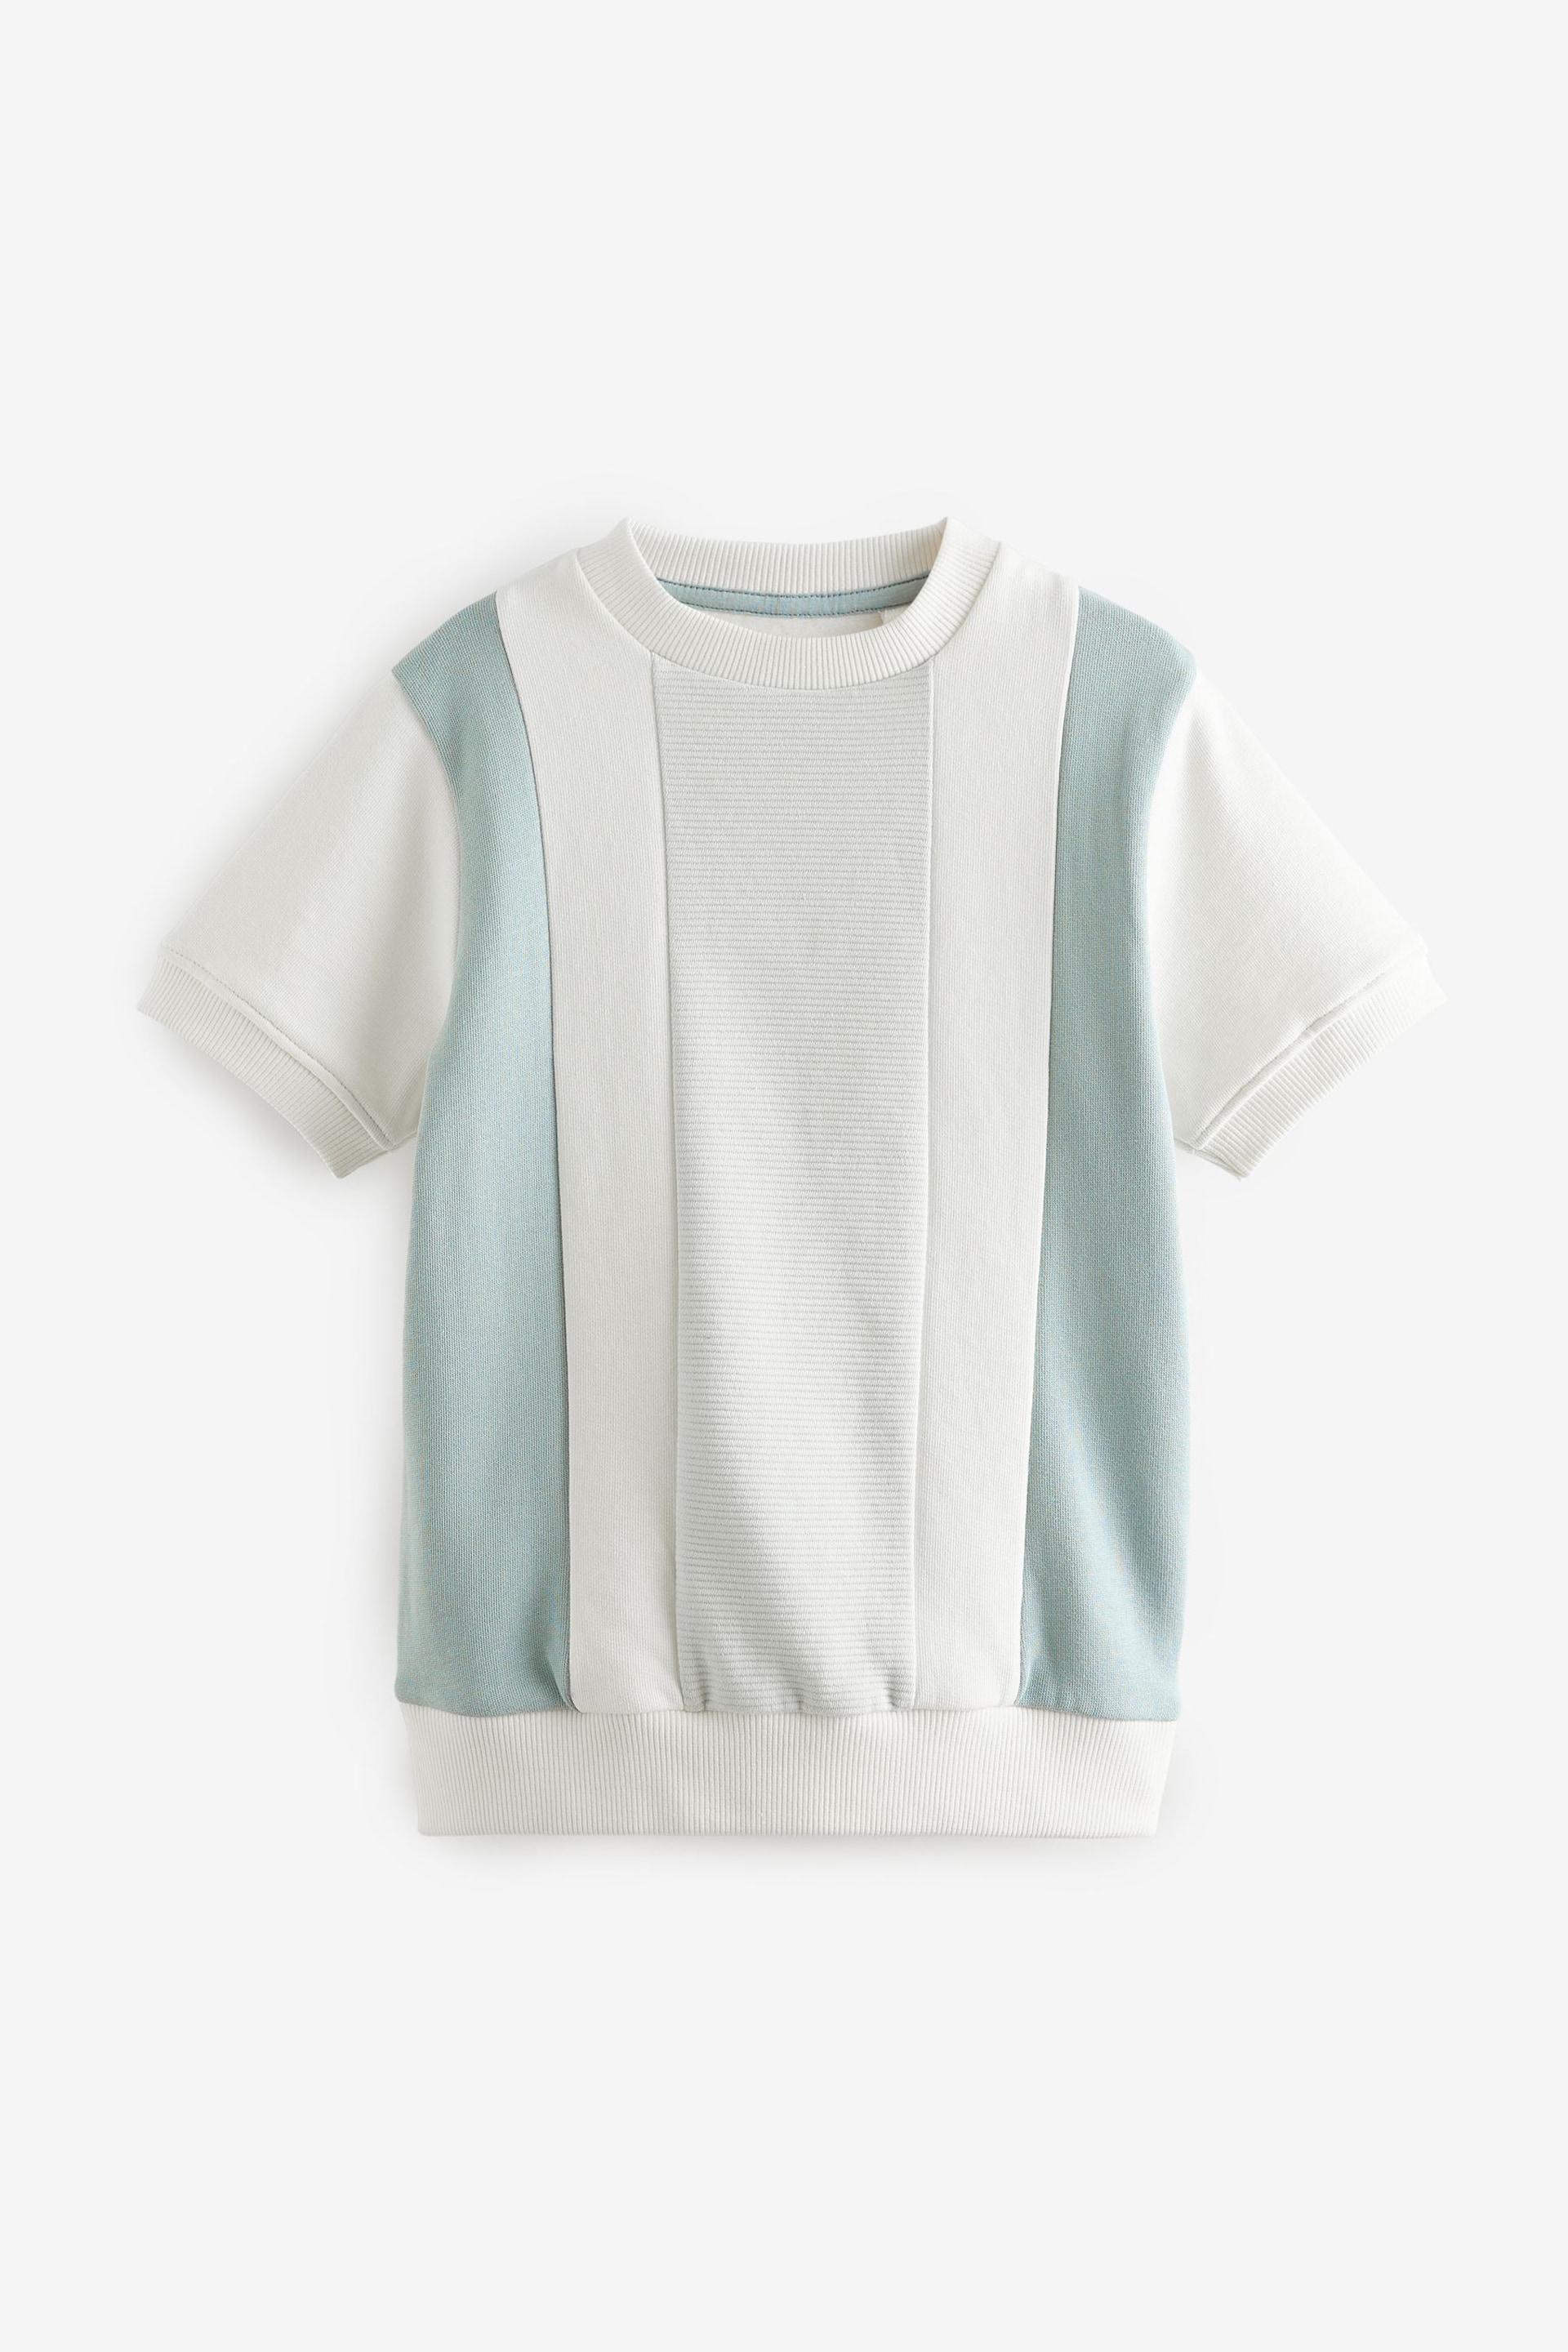 Green Vertical Textured Colourblock Top (3-16yrs) - Image 1 of 3